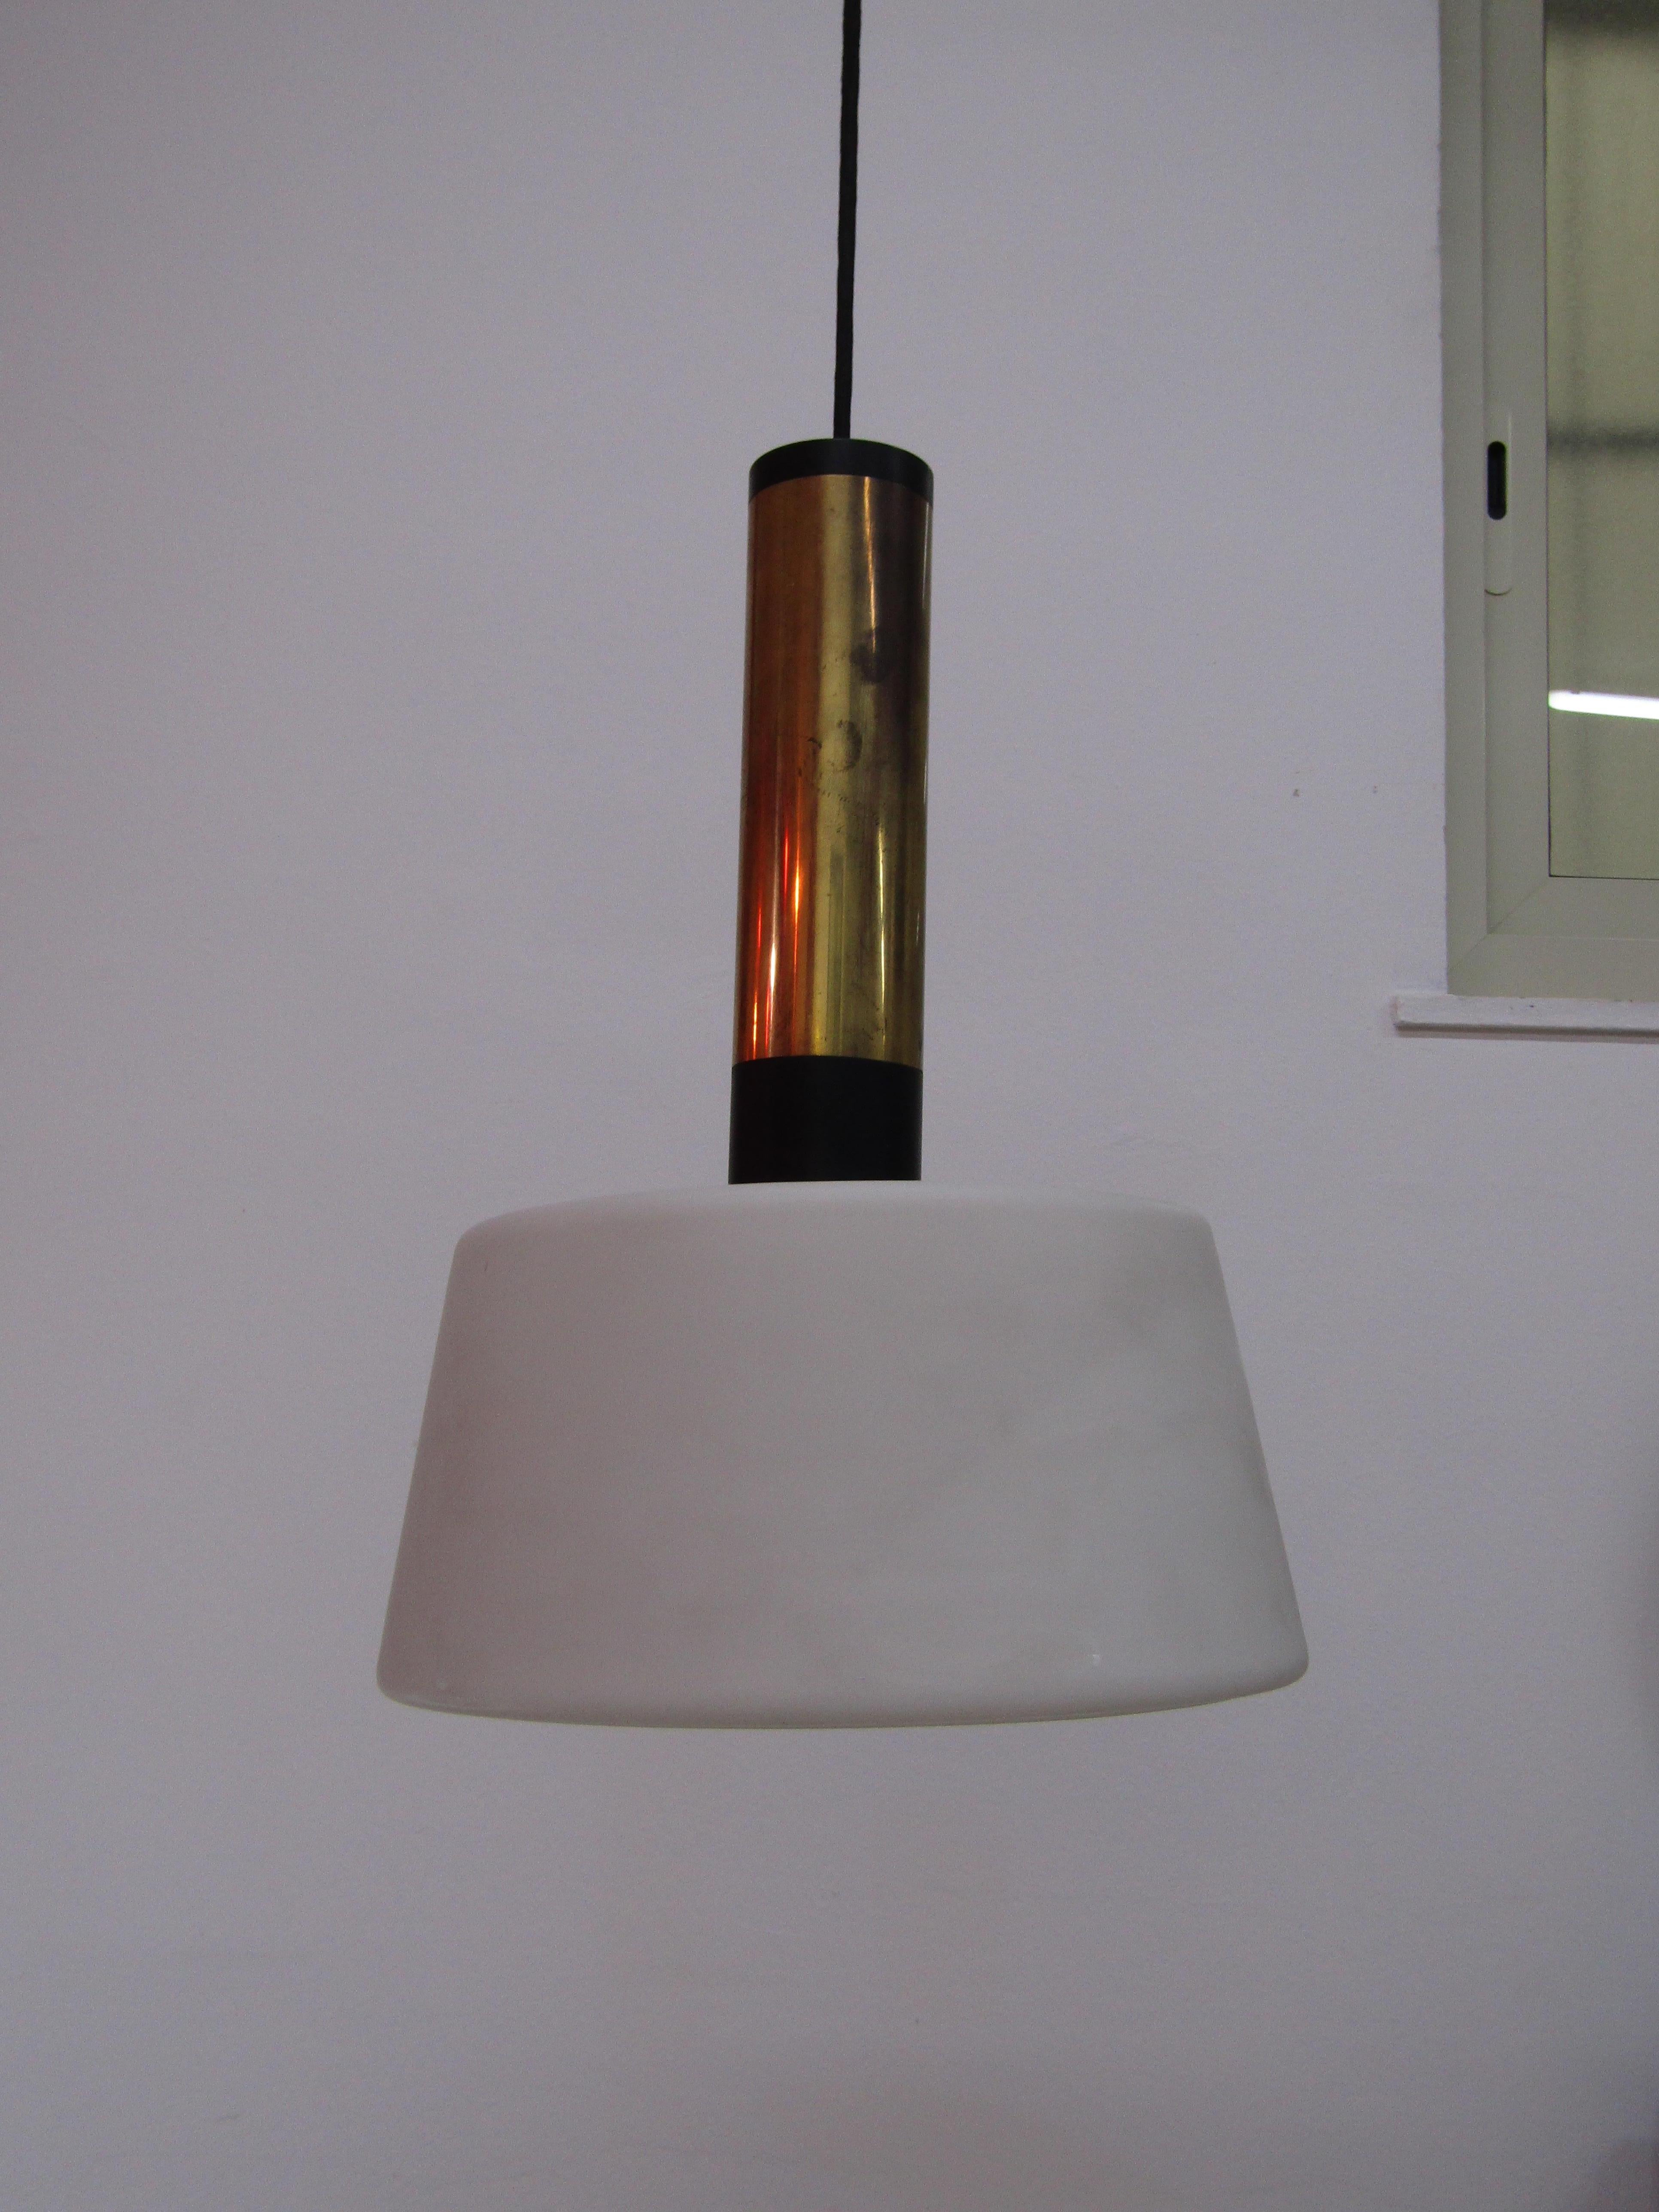 Suspension lamp made by Stilnovo in Italy with a brass structure and  midcentury For Sale 1